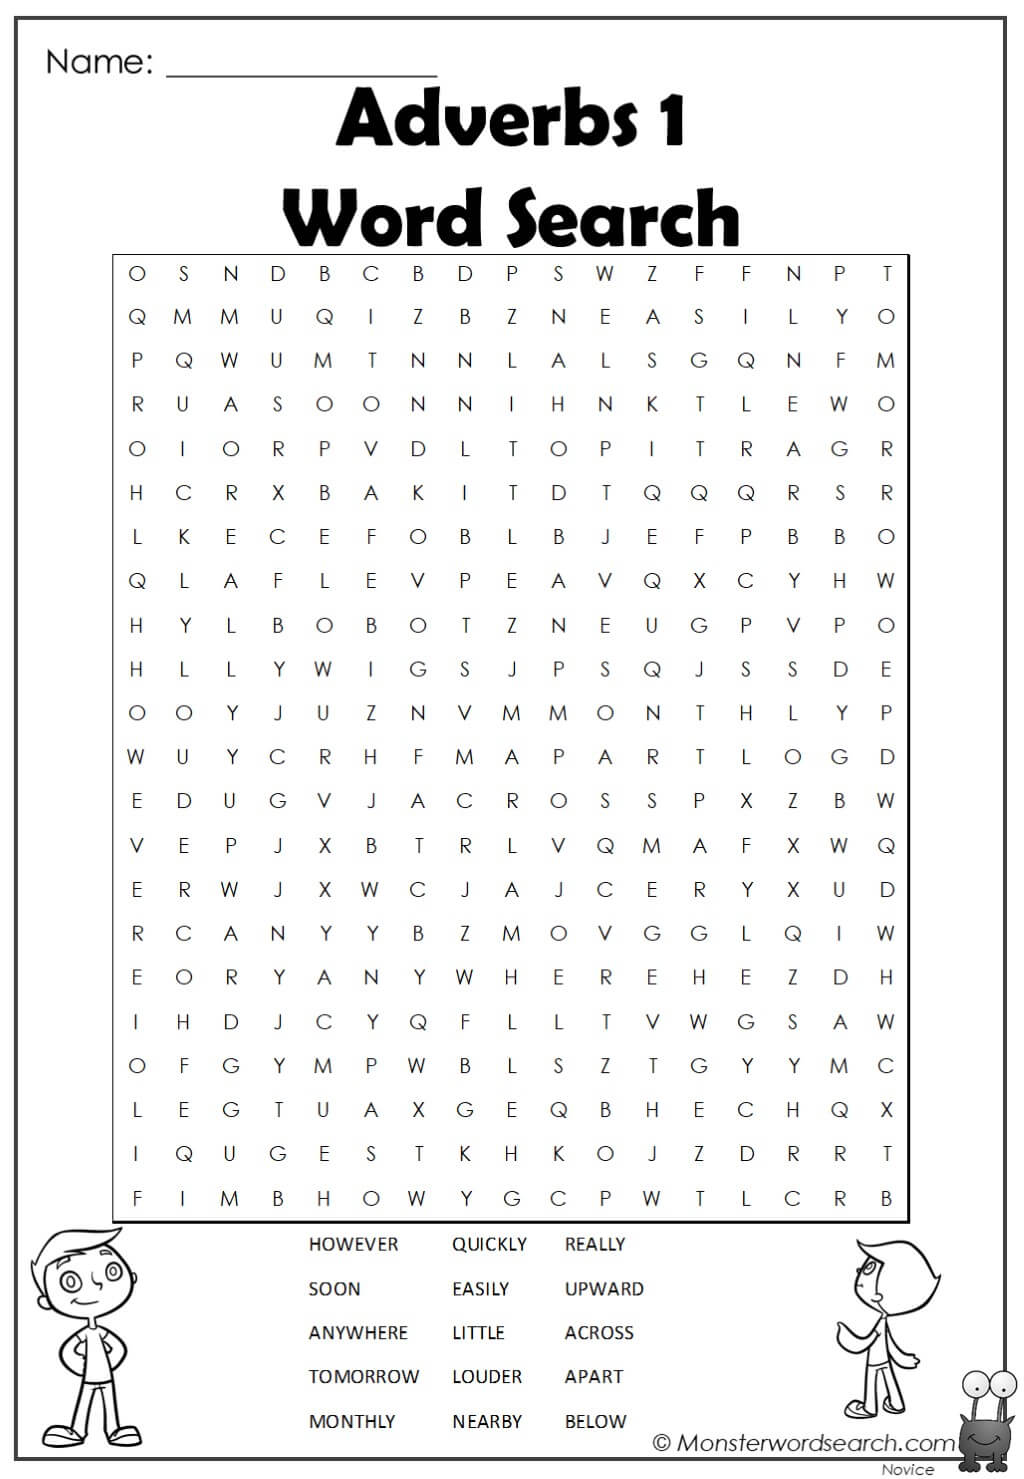 Adverbs Word Search